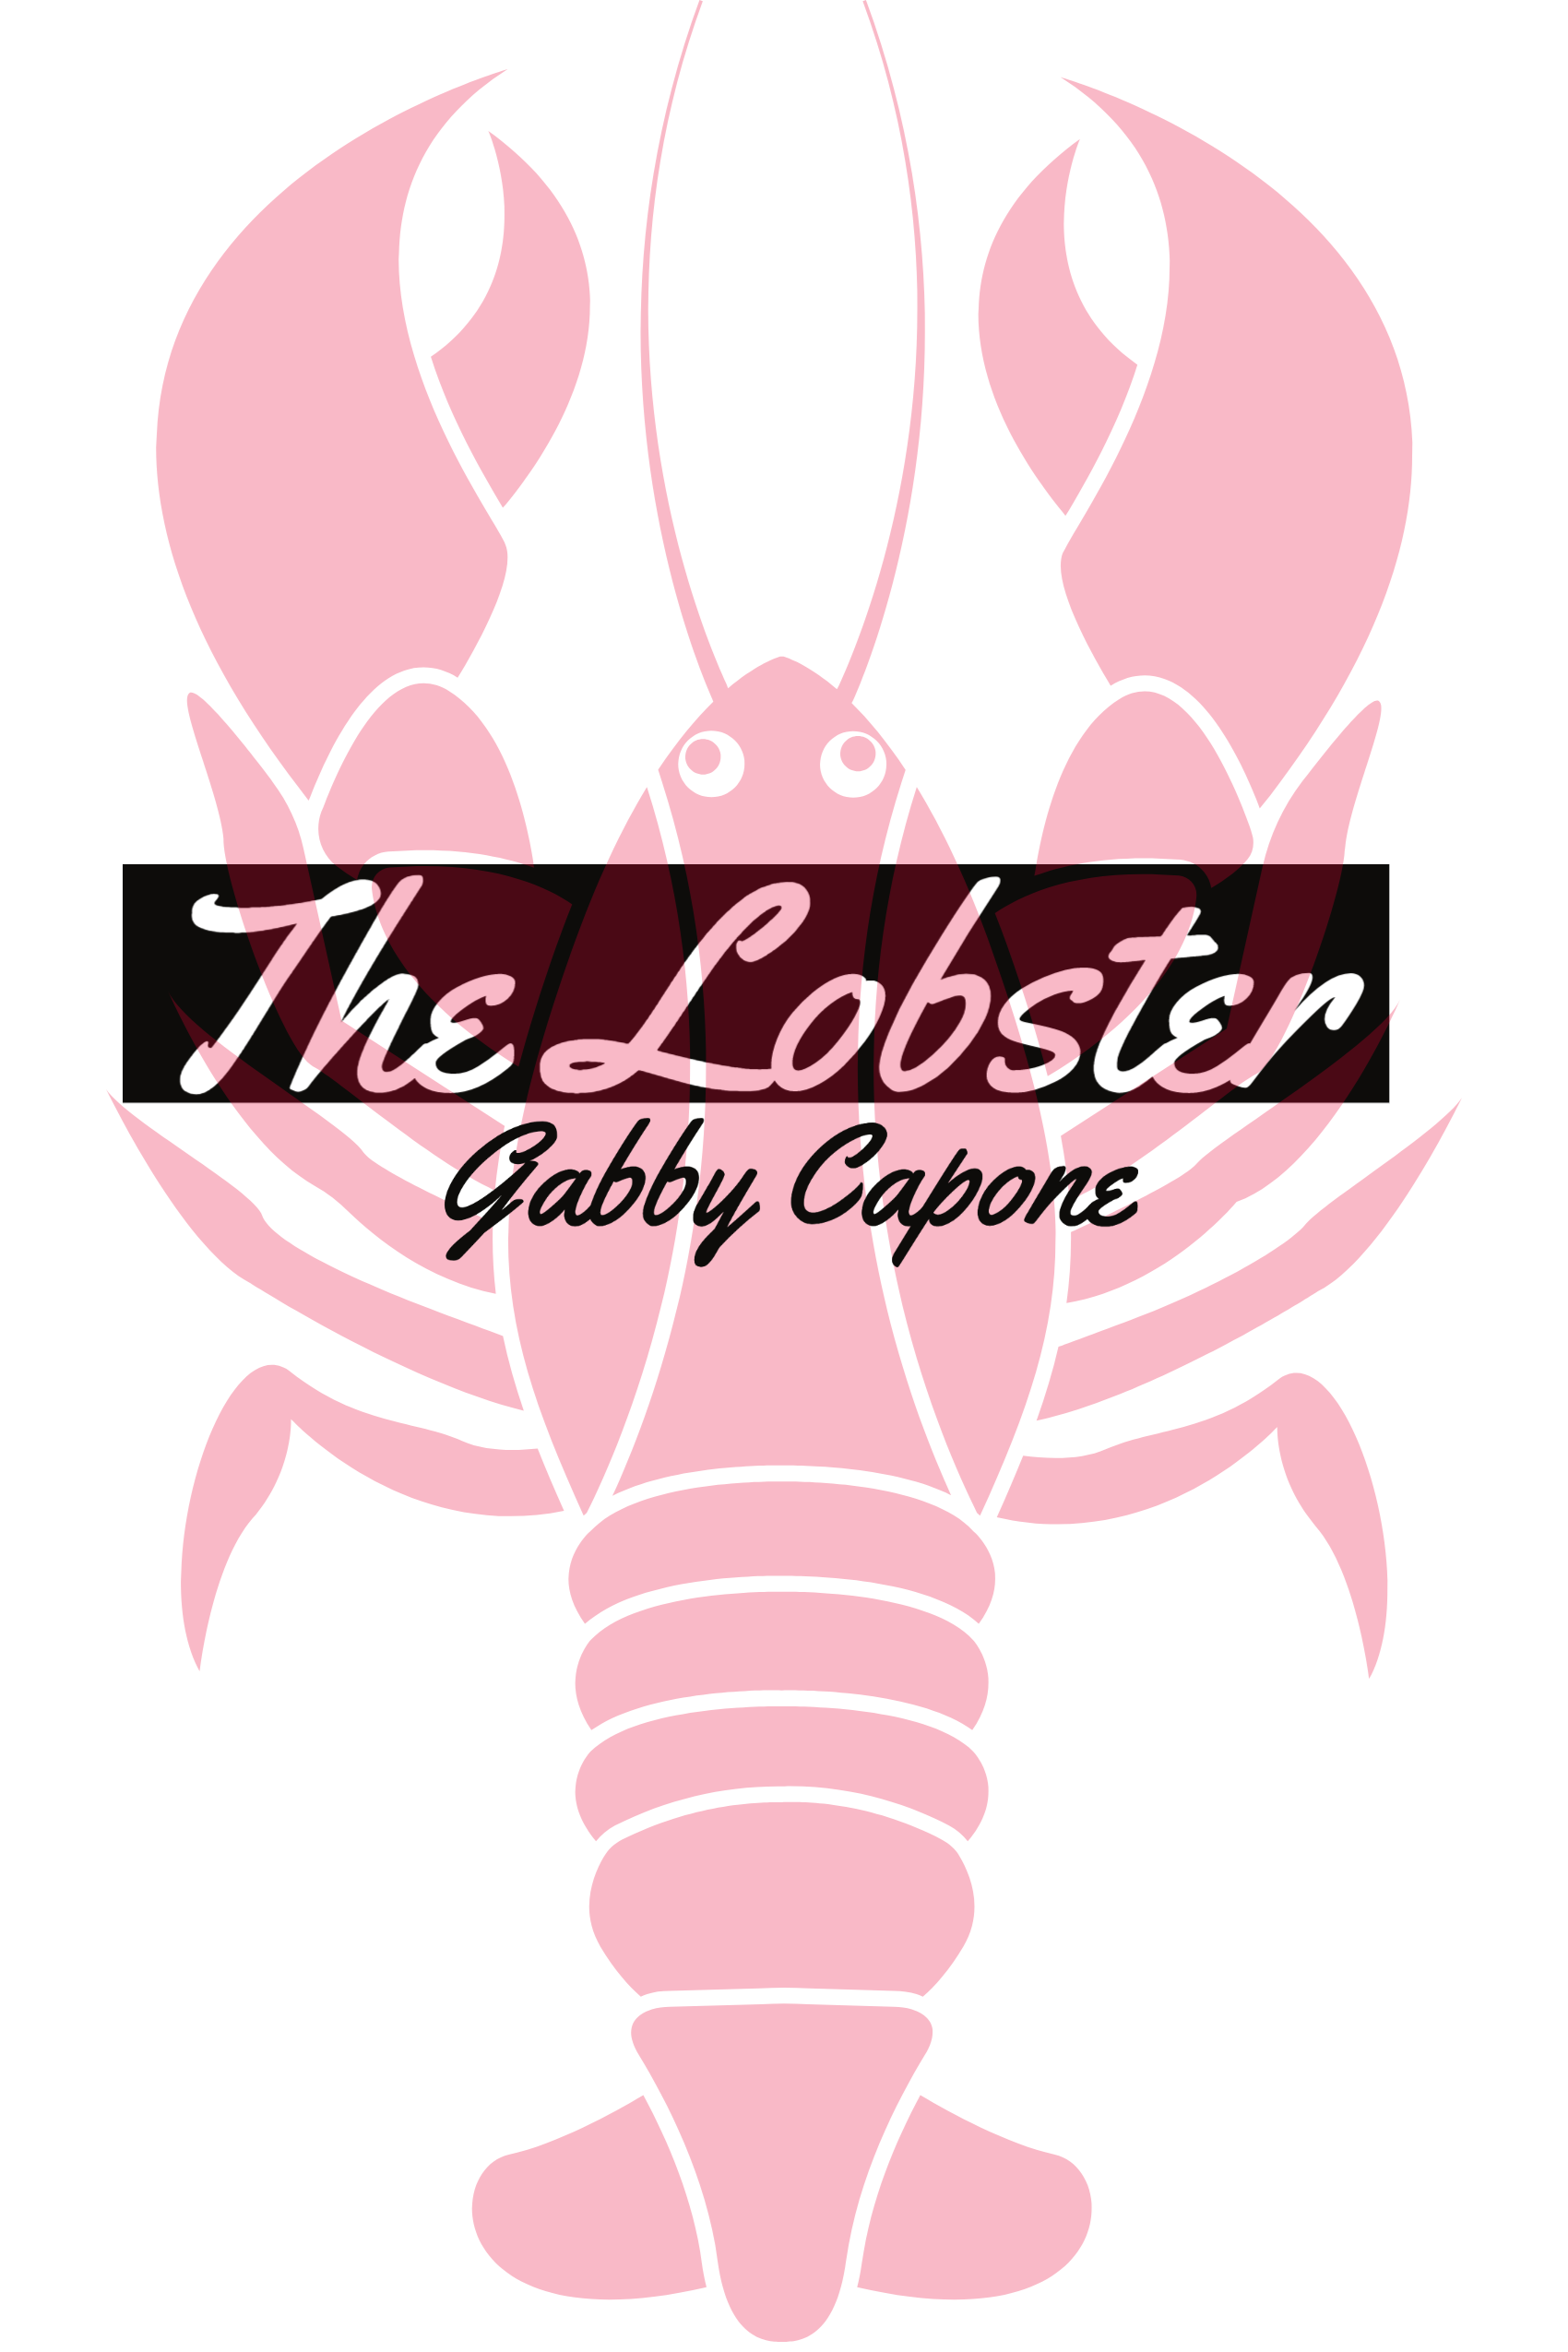 THE LOBSTER by Gabby Capone